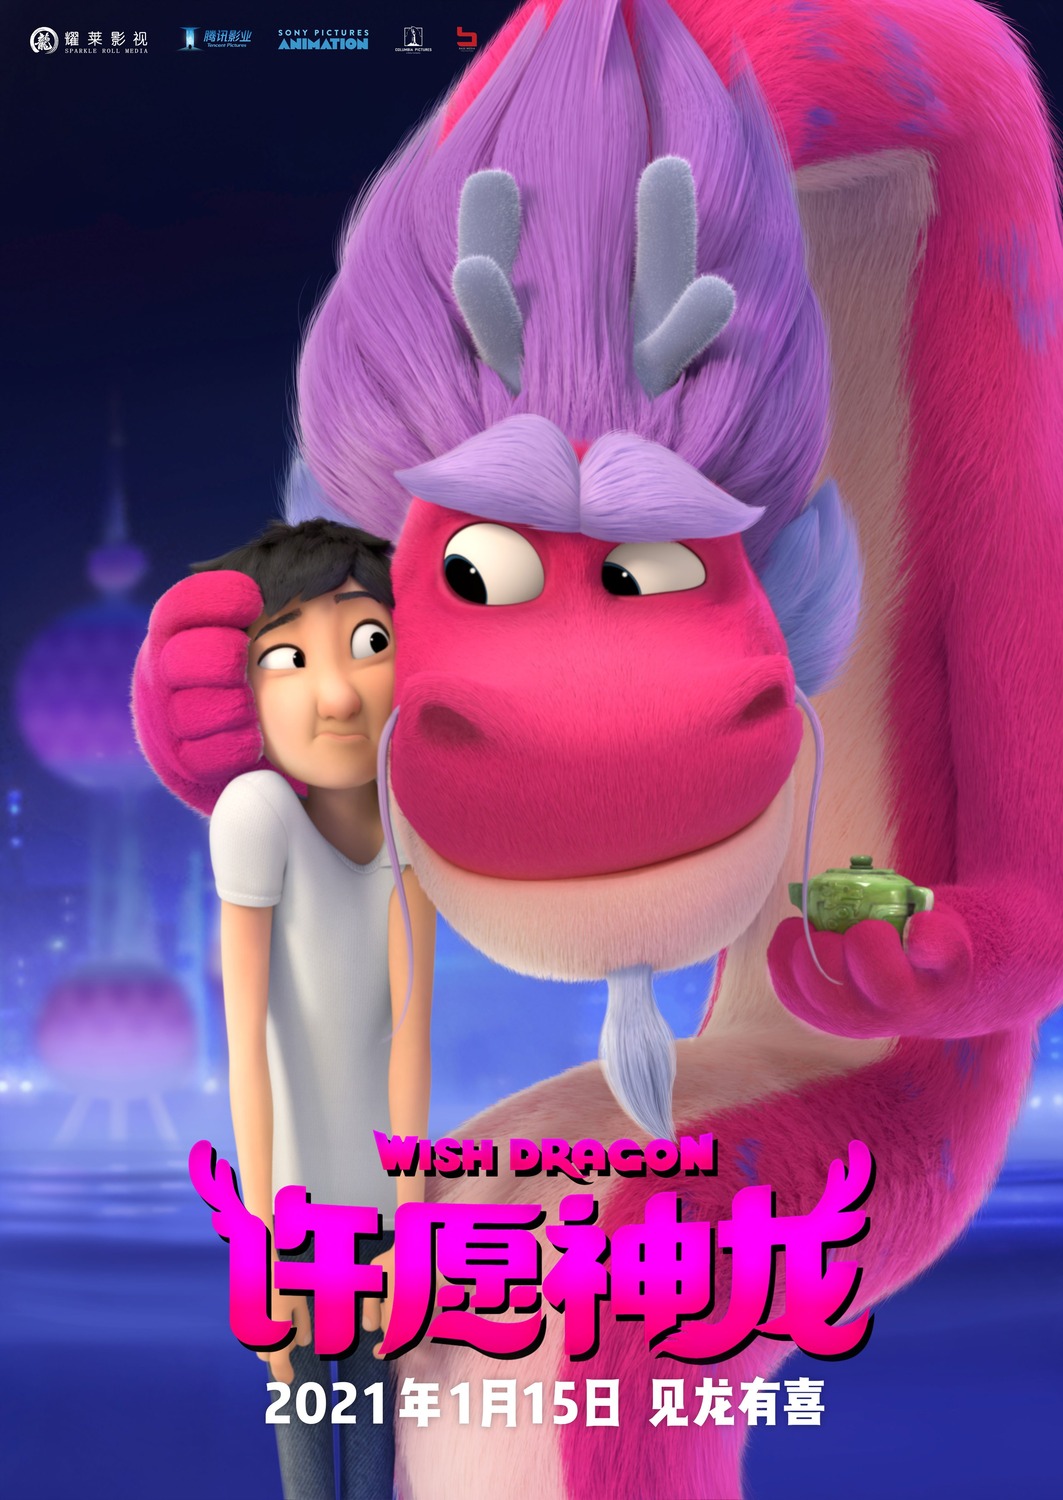 Extra Large Movie Poster Image for Wish Dragon (#3 of 3)